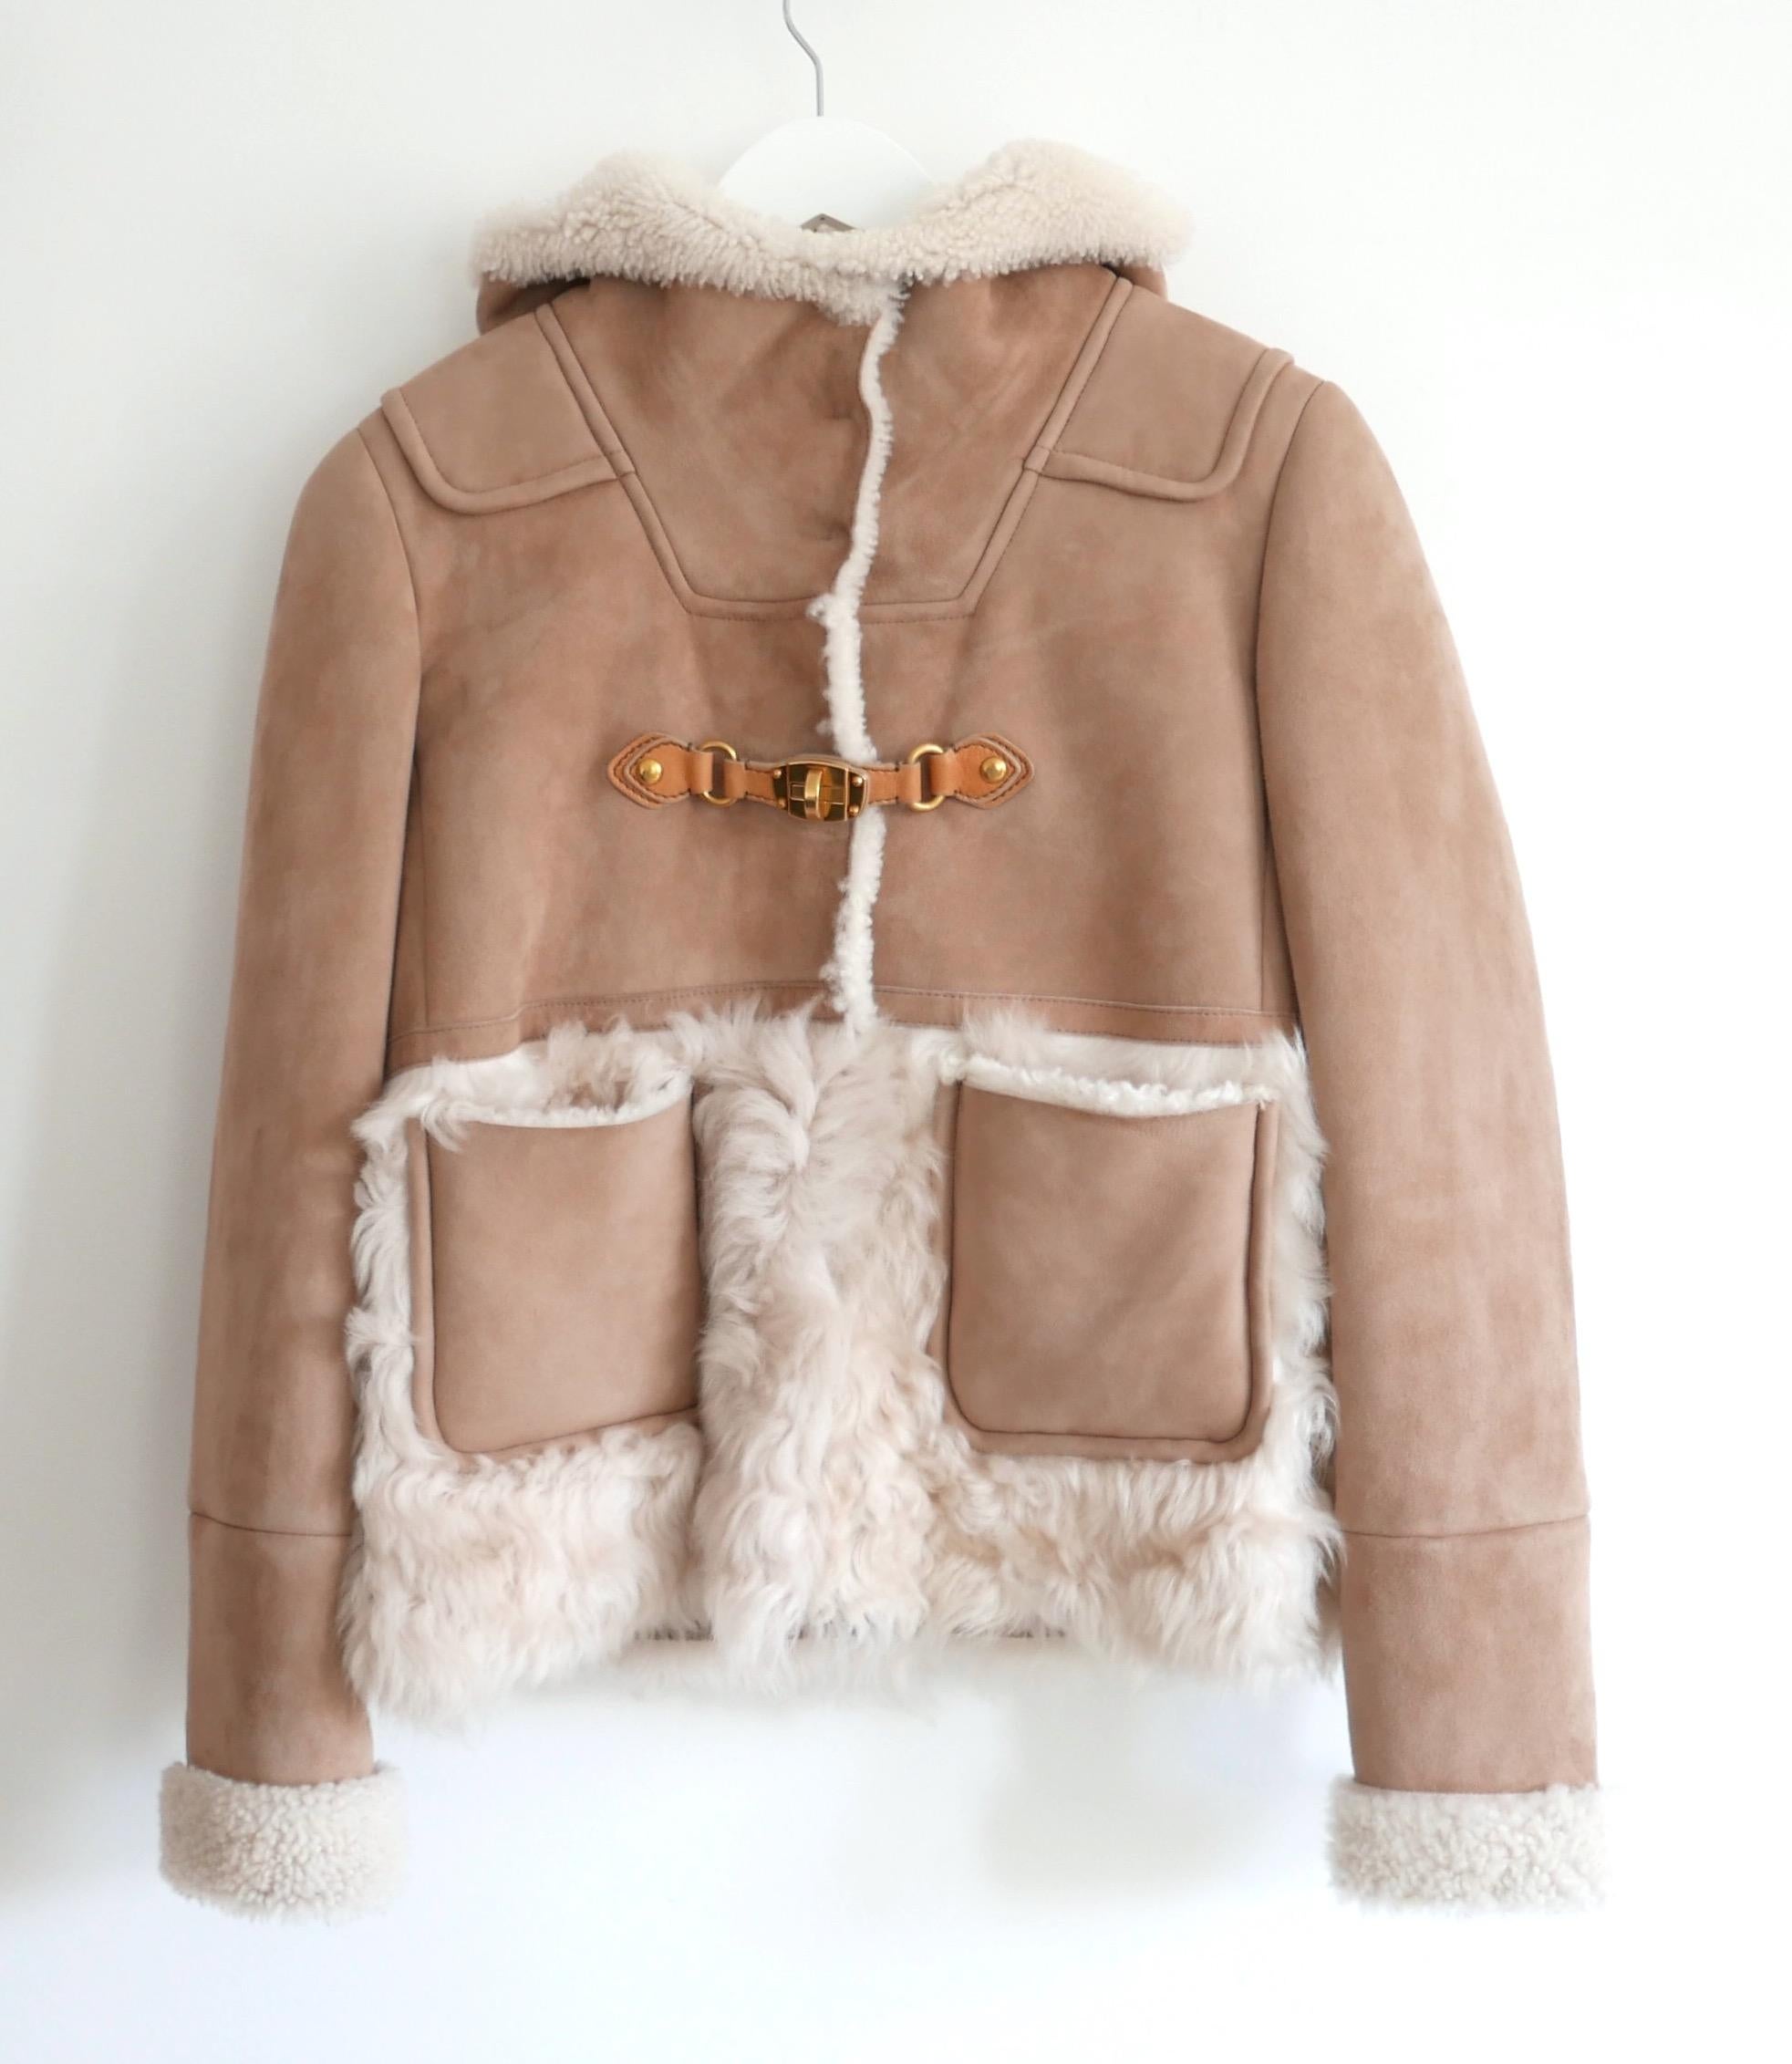 Gorgeous archival Miu Miu Pre-Fall 2010 shearling short coat. bought for £3500 and unworn. Made from super soft camel coloured suede with a thick, fluffy shearing inner, it has feature front pockets, deep hood, optional high neck with poppers and